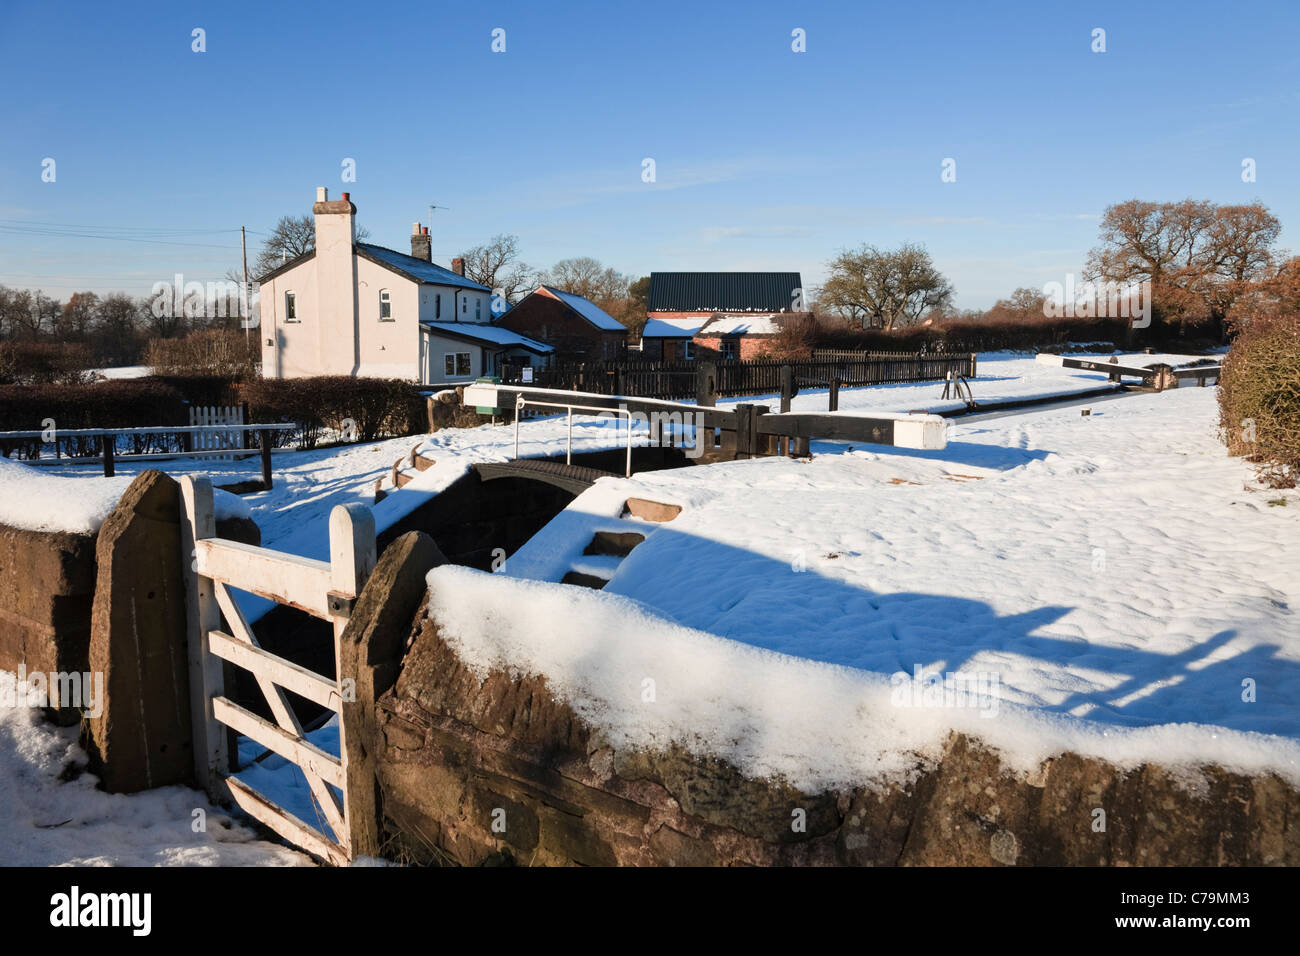 Lock 5 at Bosley locks on the Macclesfield canal with snow in winter. Bosley, Cheshire, England, UK, Britain Stock Photo